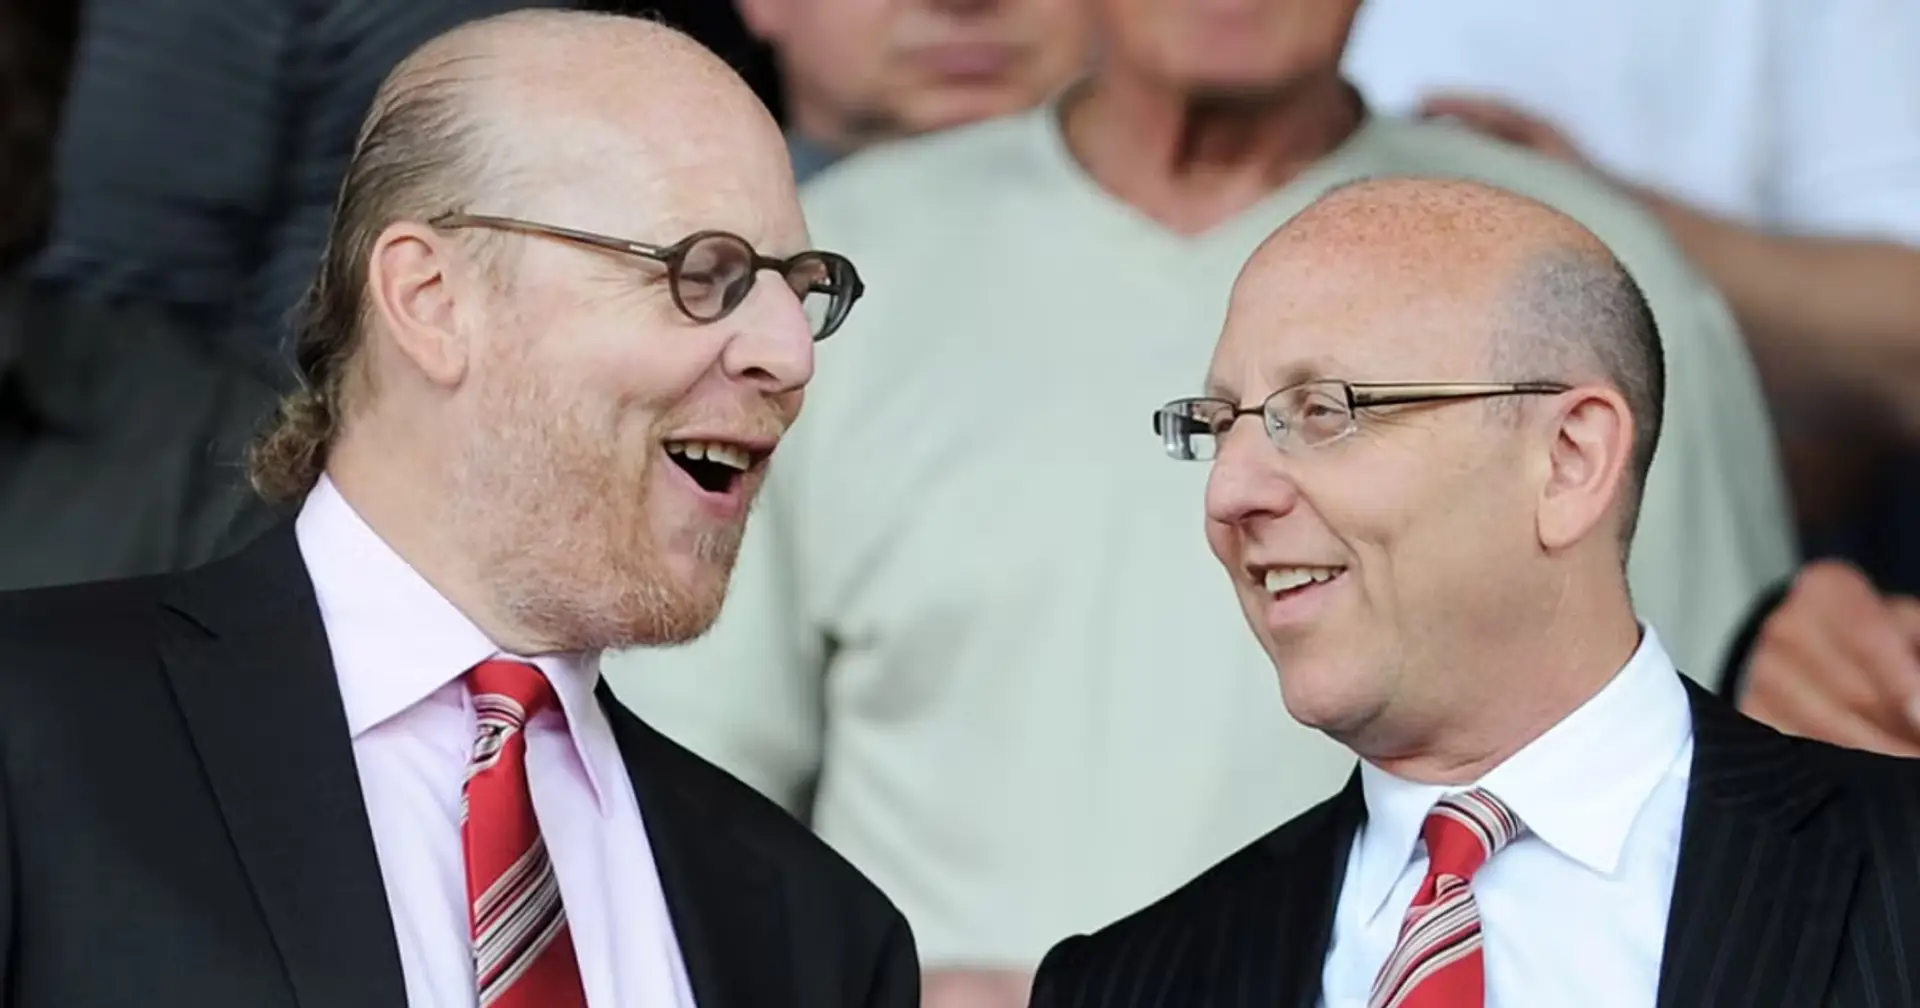 How would you react if Glazers decided NOT to sell United after all?